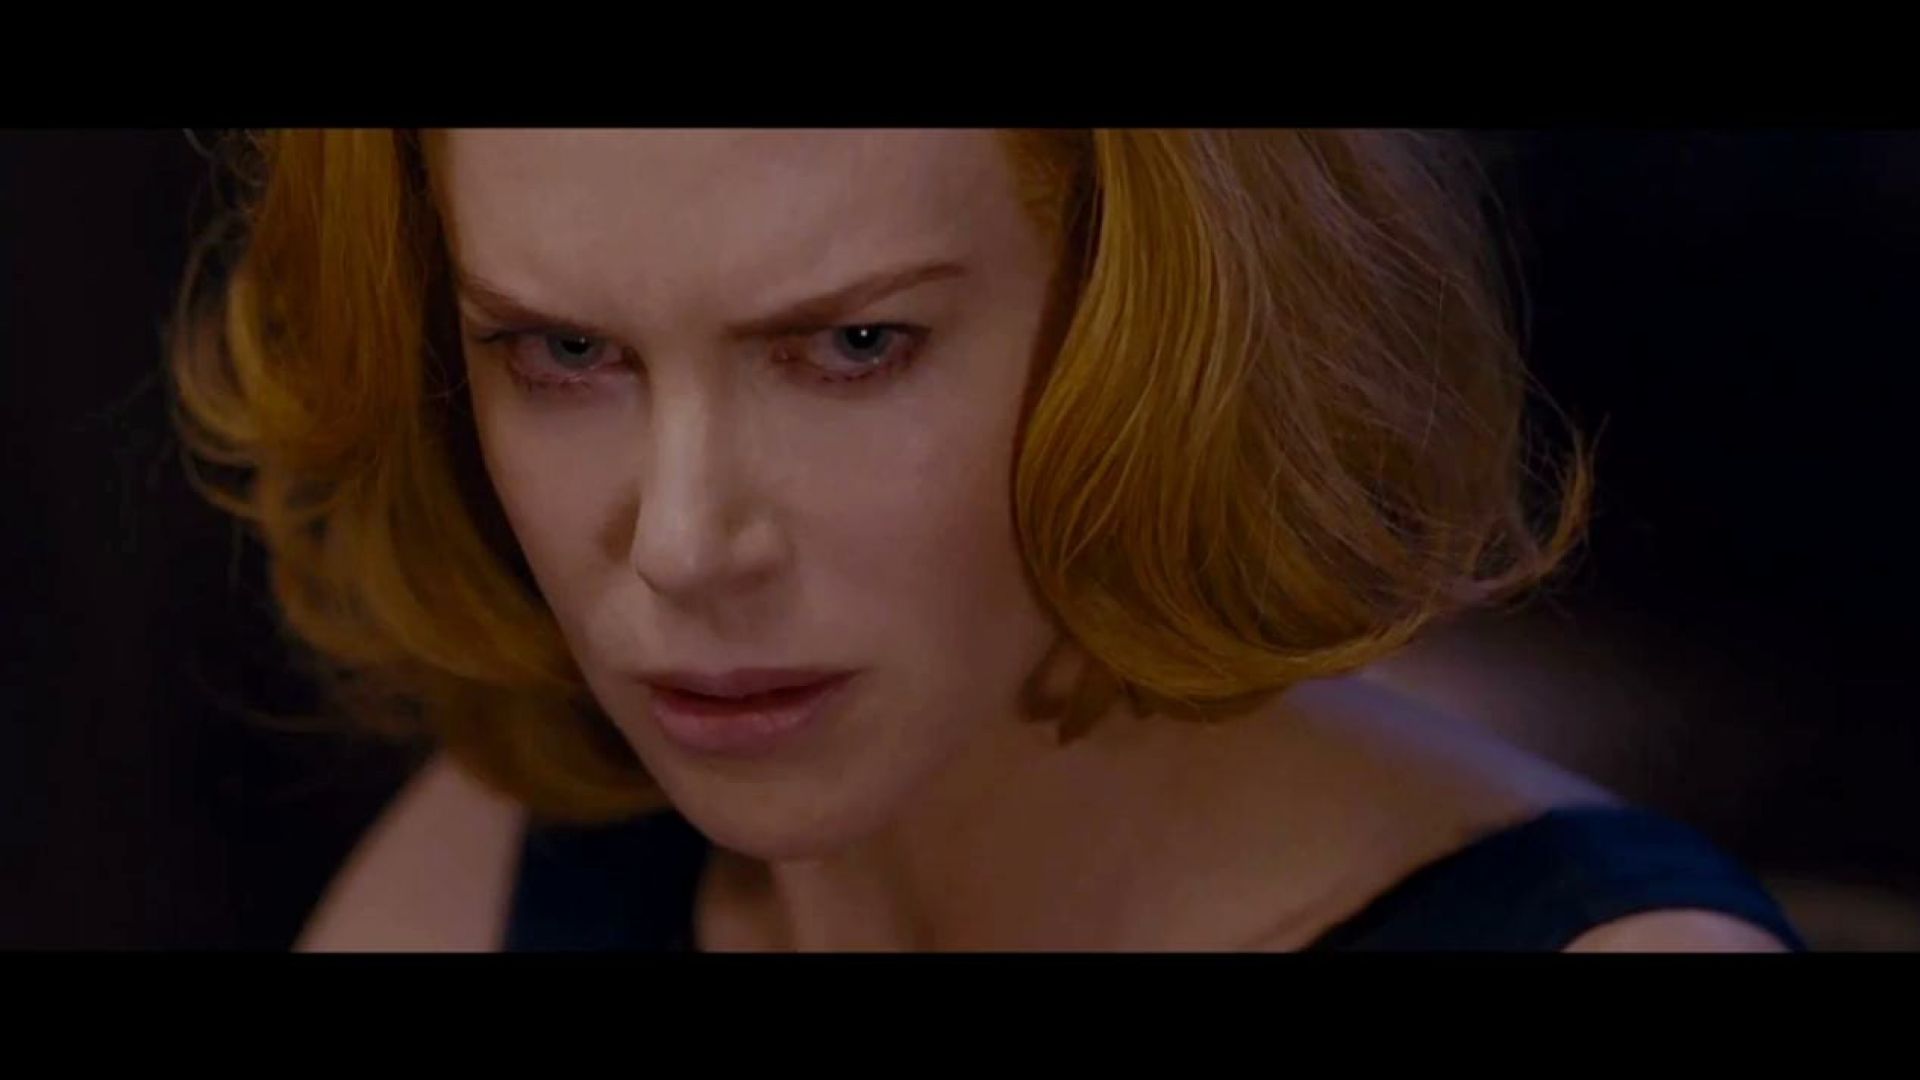 Nicole Kidman explains why we have children in Stoker